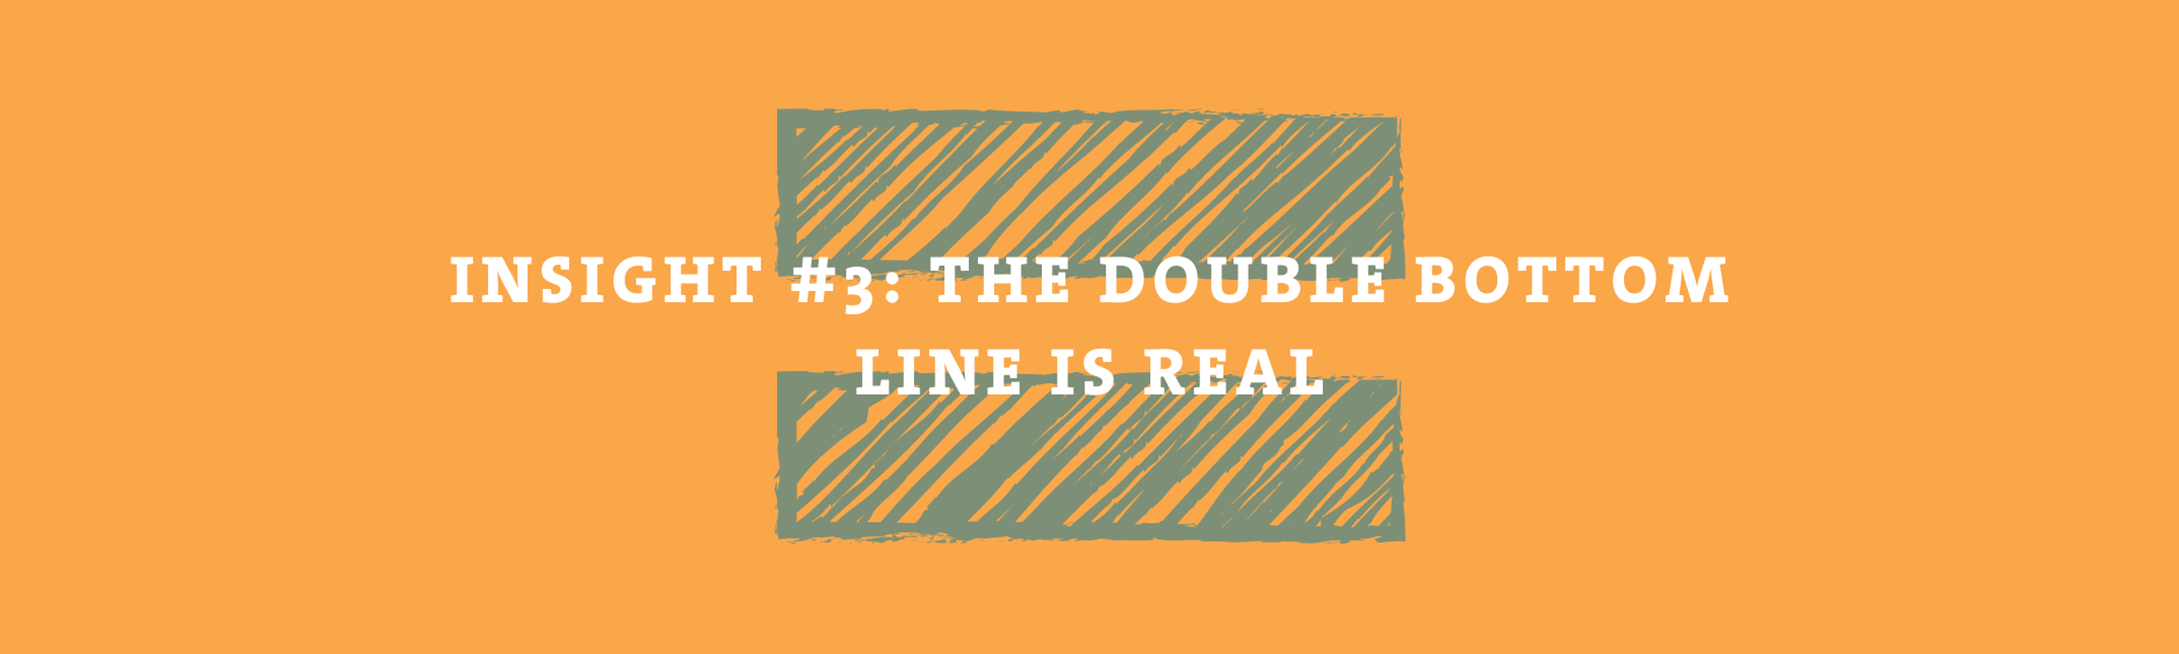 Insight #3: The Double Bottom Line is Real